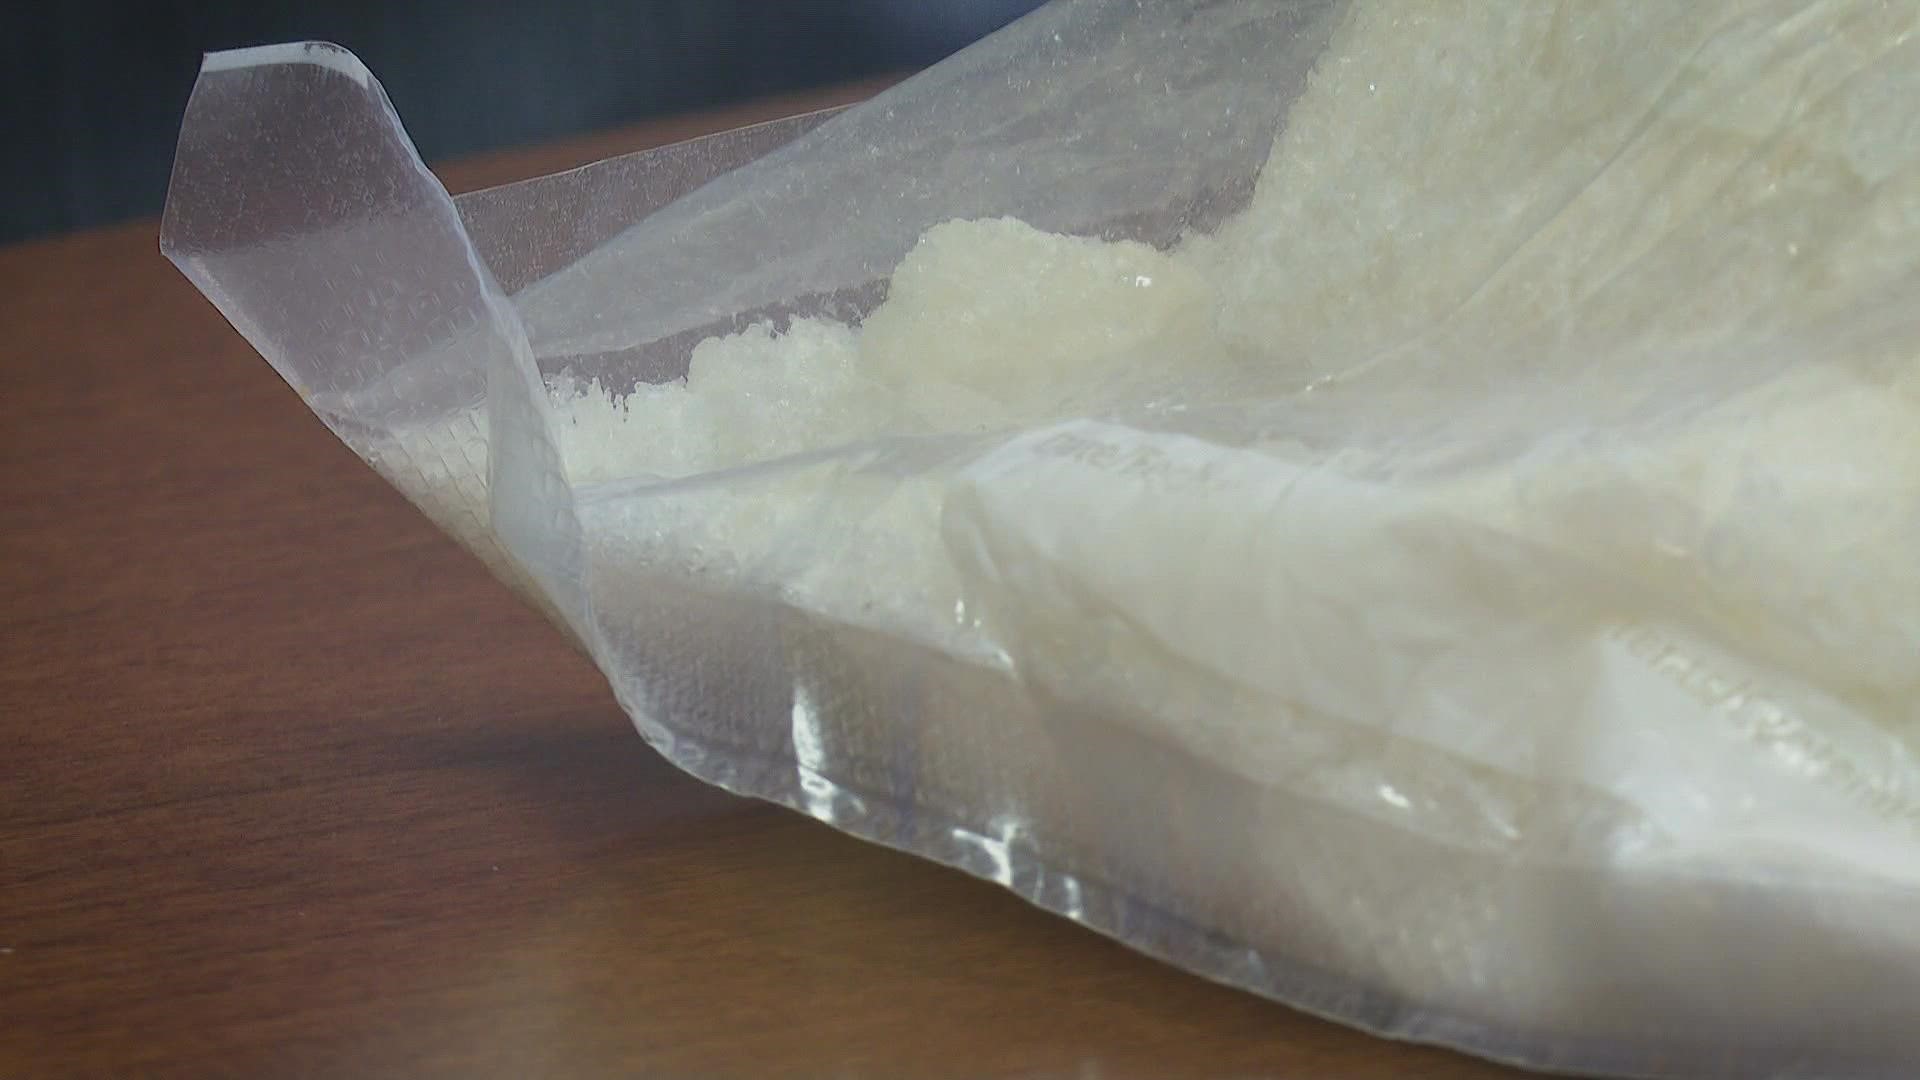 Maine drug agents are seizing more methamphetamines than years past as trafficking into the state reaches new heights.